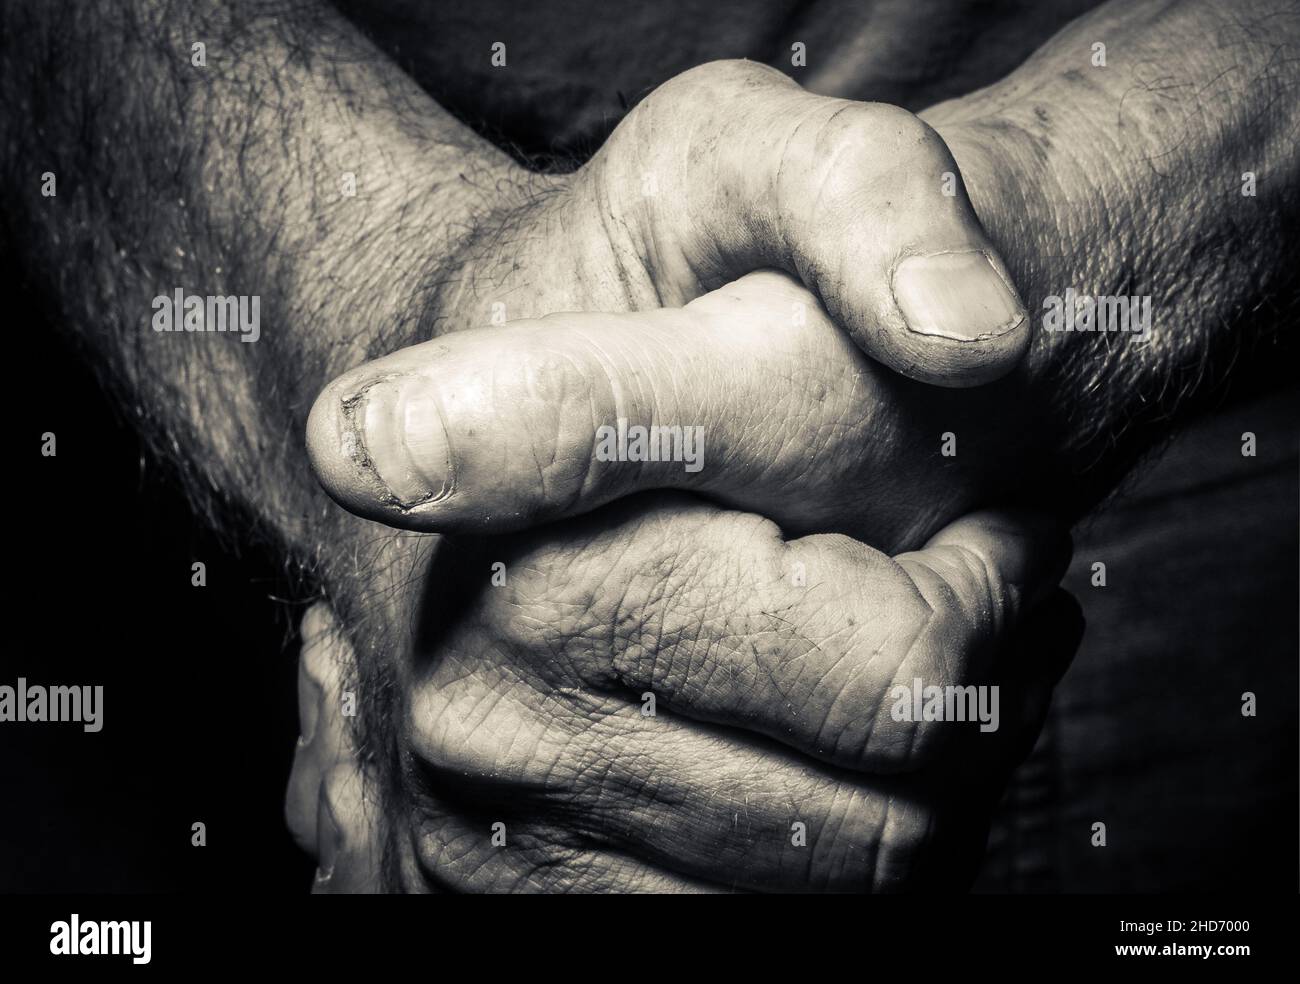 A close-up of an older working man's hands Stock Photo